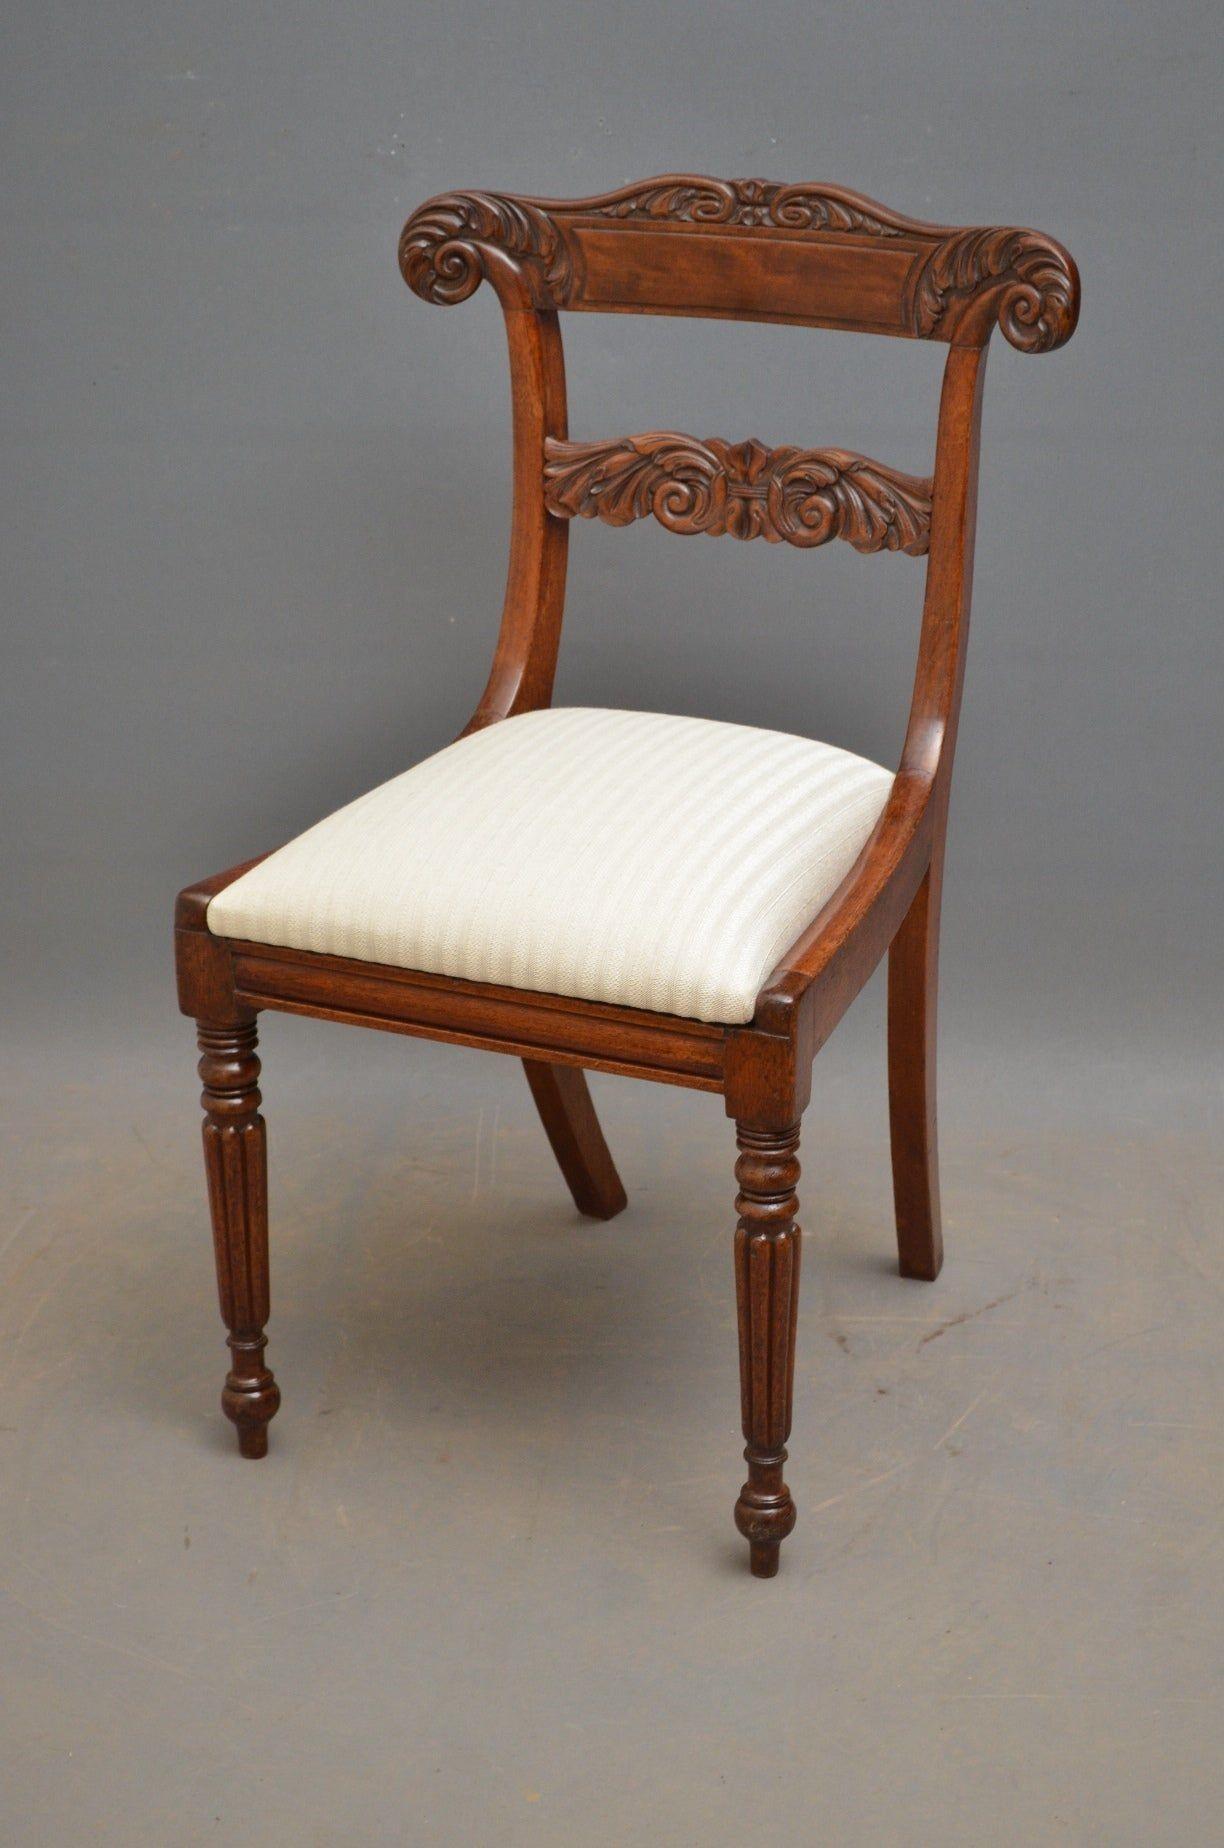 A superb quality set of eight William IV, mahogany dining chairs including two carver chairs, each having finely carved top and mid-rail with carvers having scroll open arms, all with drop-in seats and standing on turned and fluted tapering legs.